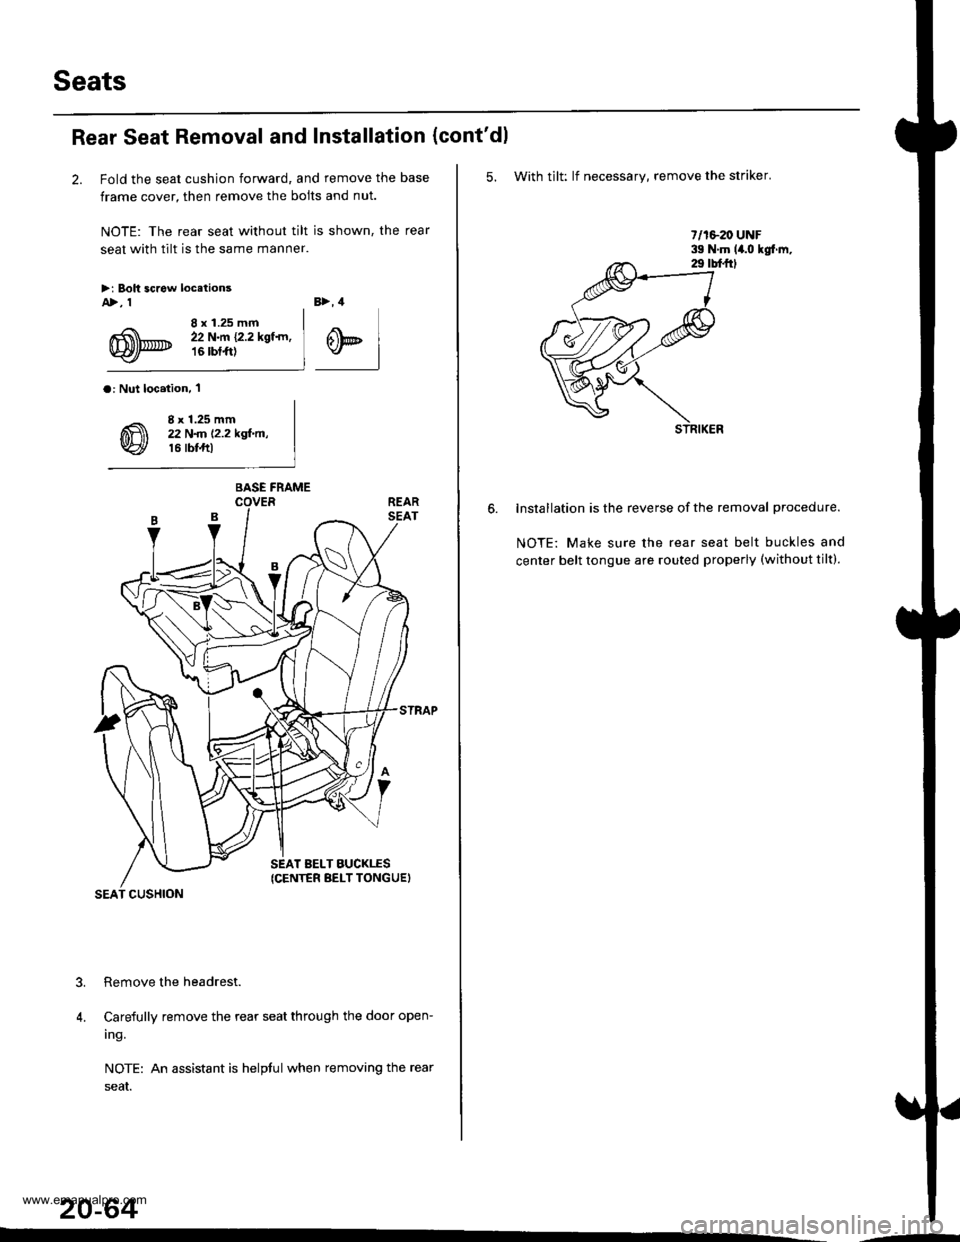 HONDA CR-V 1997 RD1-RD3 / 1.G Workshop Manual 
Seats
Rear Seat Removal and Installation
2. Fold the seat cushion forward, and remove the base
frame cover, then remove the bolts and nut.
NOTE: The rear seat without tilt is shown, the rear
seat wit